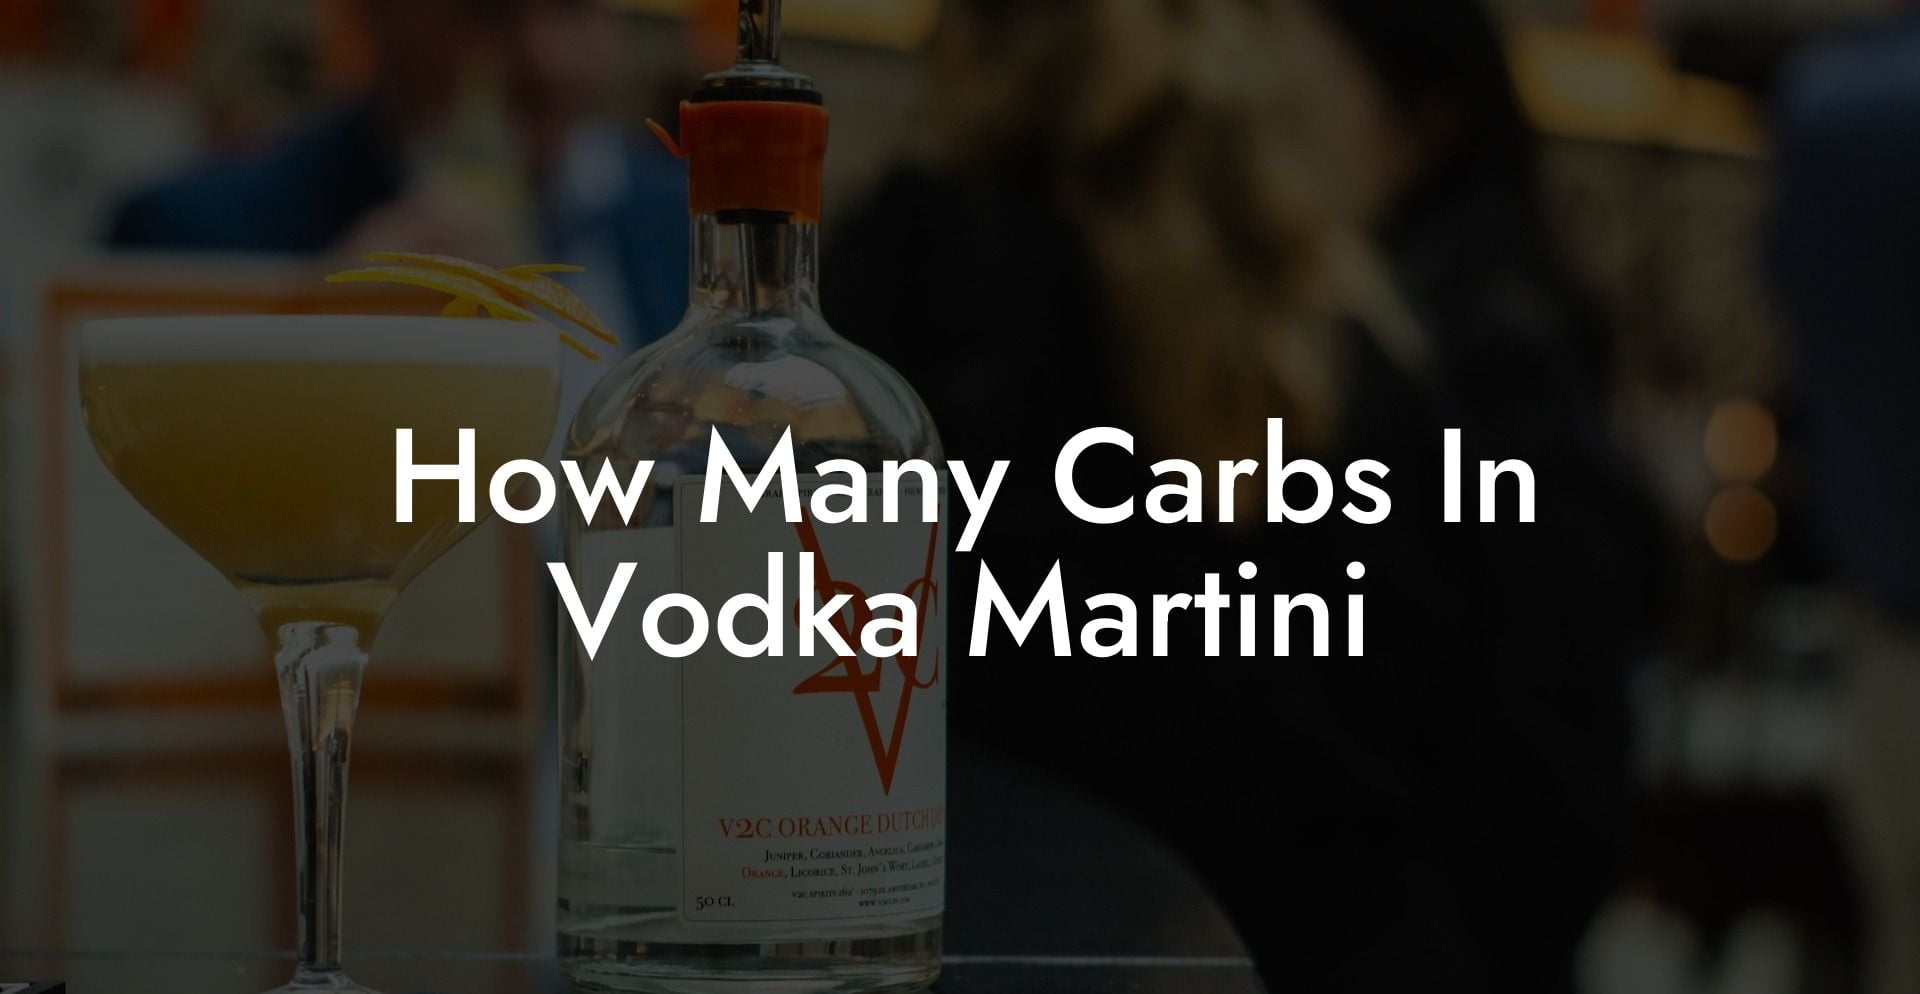 How Many Carbs In Vodka Martini